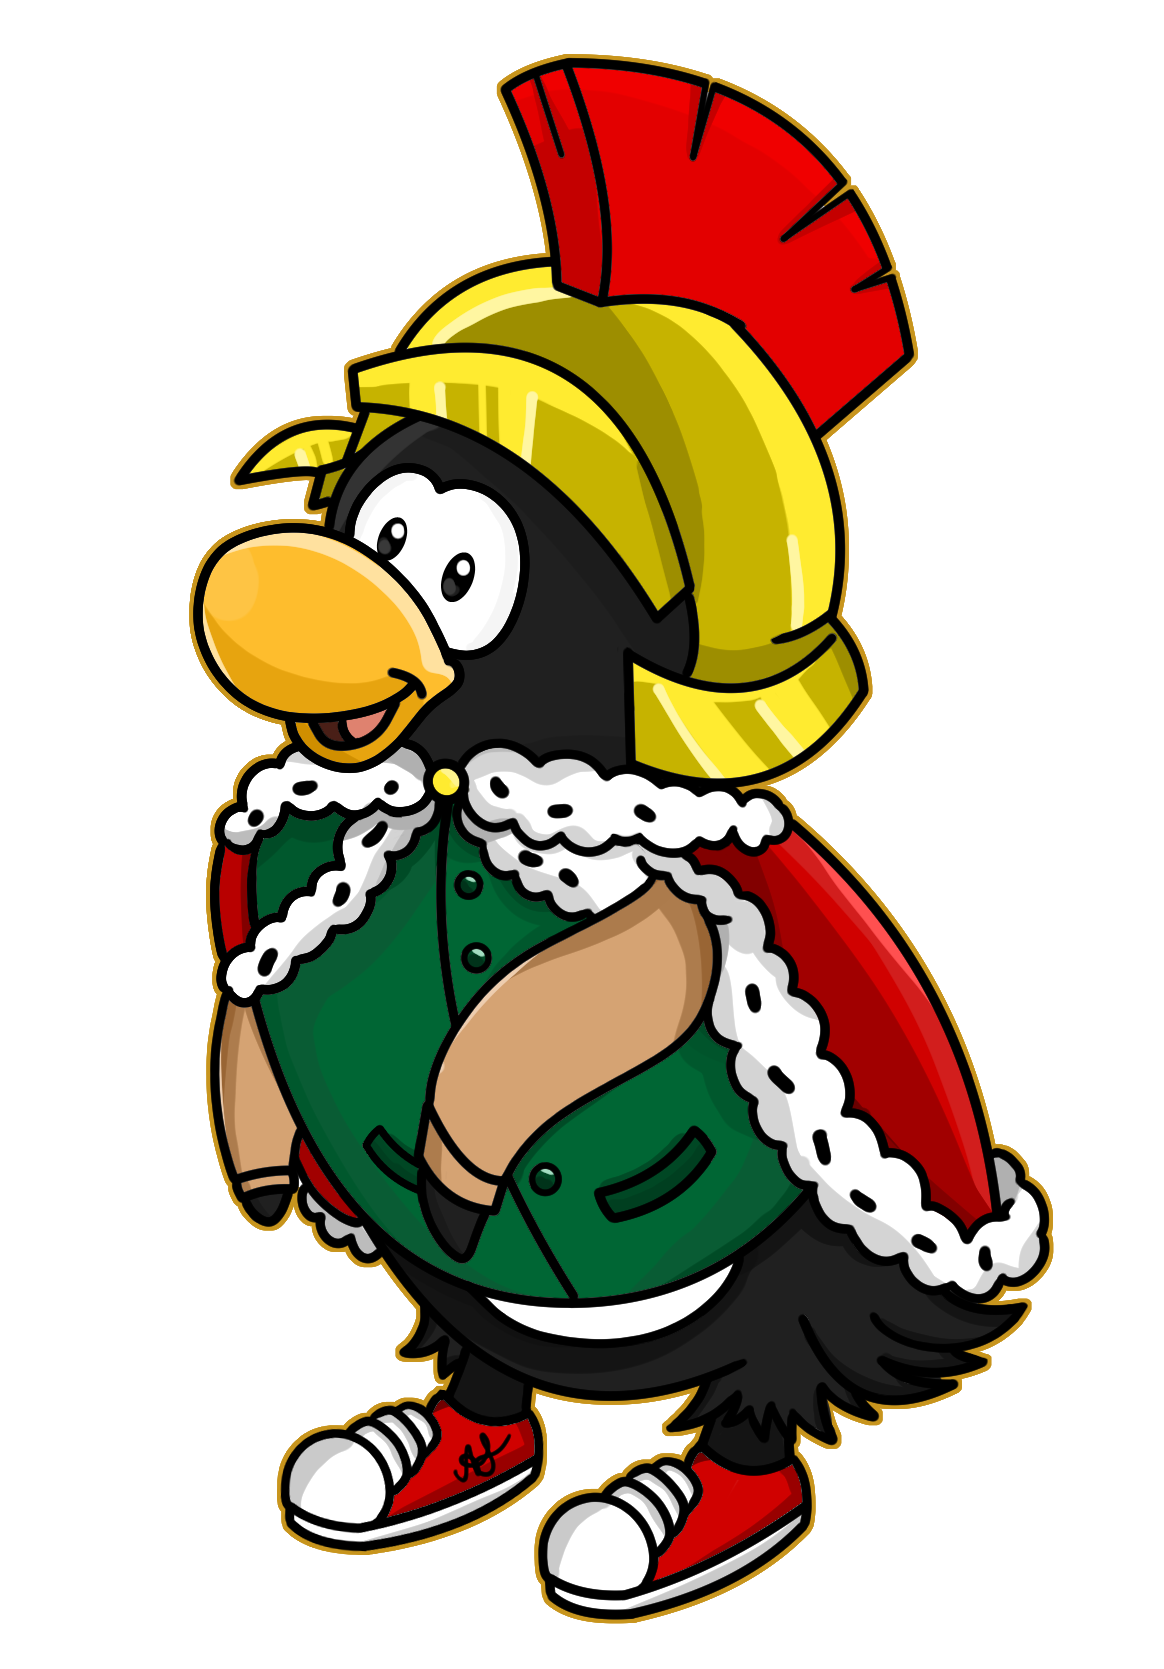 Commission] [Character Drawing] Club Penguin by workofanna on DeviantArt